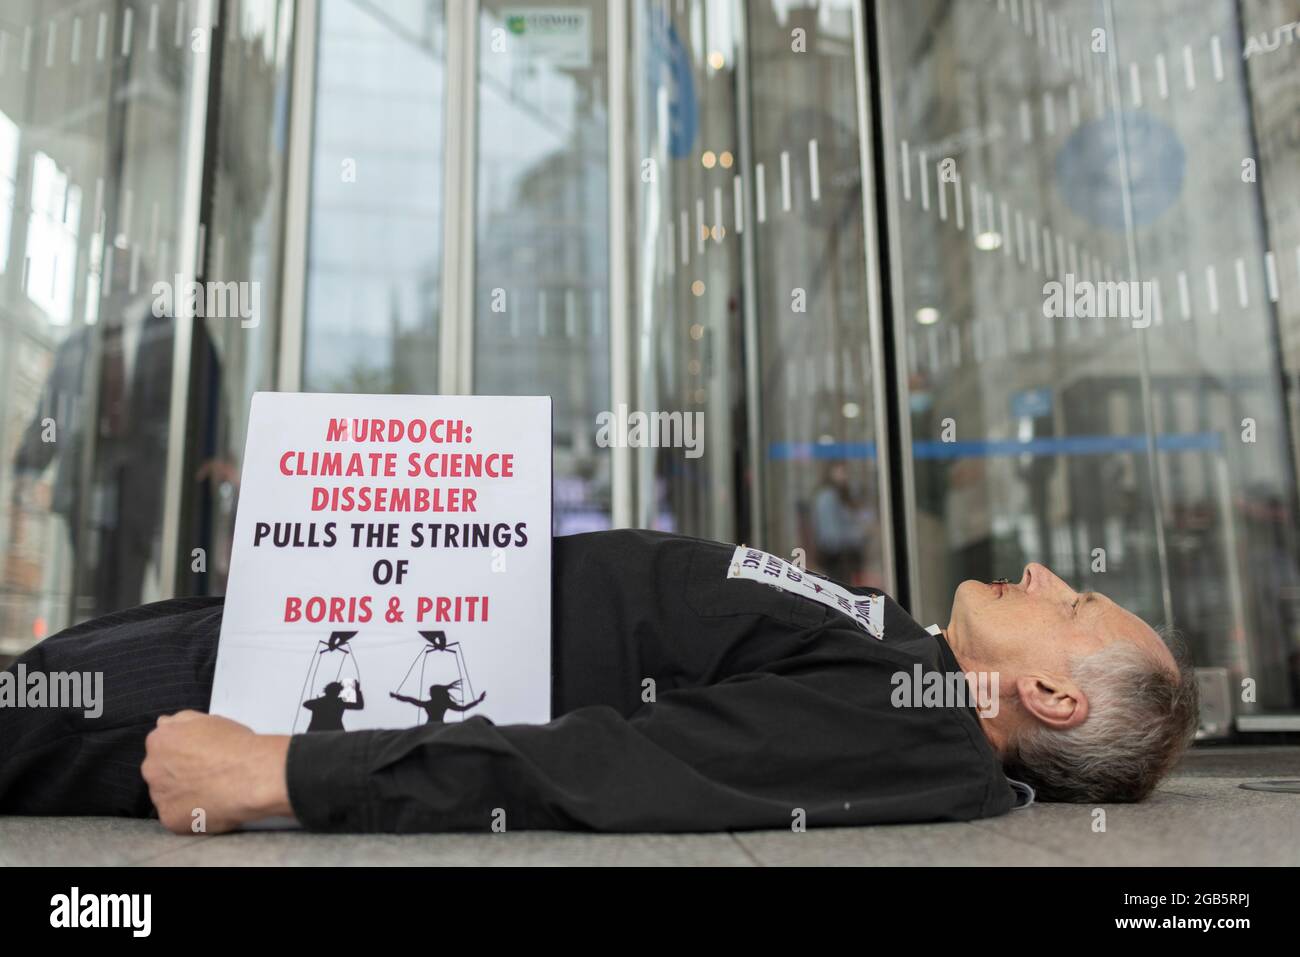 London, UK. August 2nd 2021: Reverend Tim Hewes, aged 71, sewed his lips shut outside News UK offices at lunchtime today. His action was to draw attention to the silencing of climate science by Rupert Murdoch and News Corp, which has led to a catastrophic lack of effective action to tackle the climate crisis. He held placards reading “Murdoch did this, muted climate science”, “Murdoch to the dock for ecocide”, “The Murdoch legacy? The 6th Mass Extinction on planet earth”. London, UK. Credit: Joshua Windsor/Alamy Live News Stock Photo